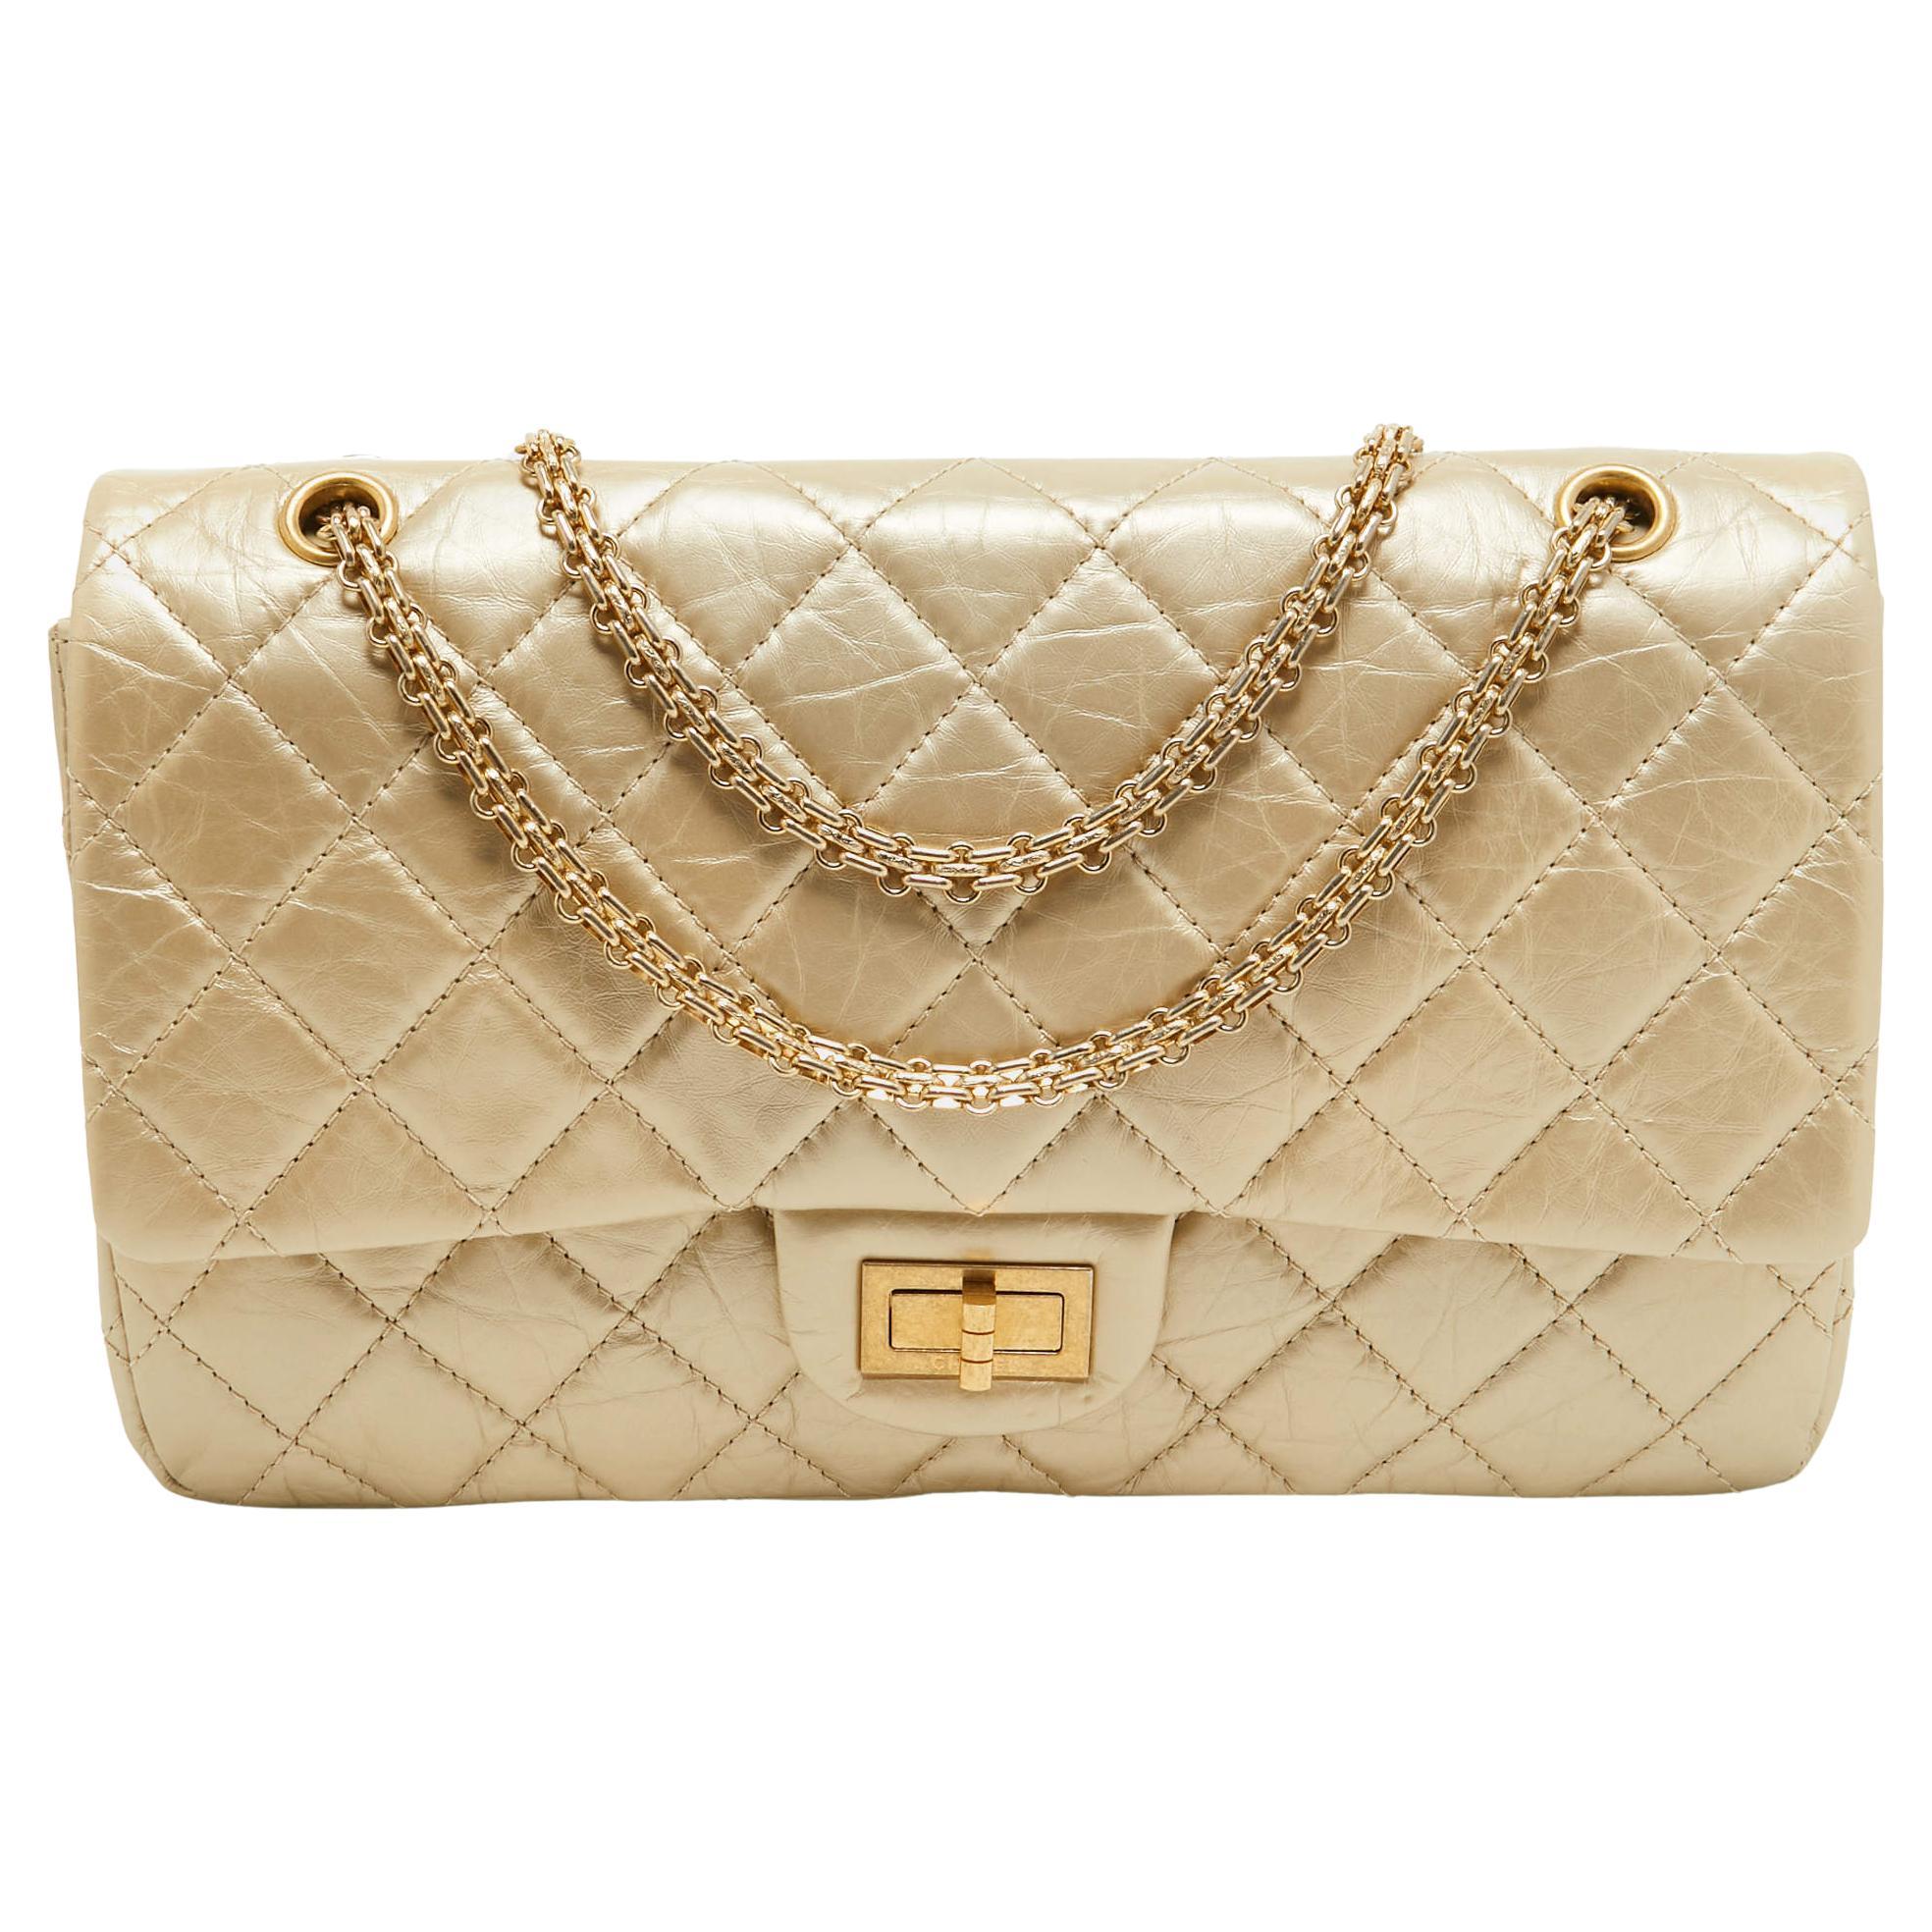 Chanel Gold Quilted Aged Leather 227 Reissue 2.55 Flap Bag For Sale